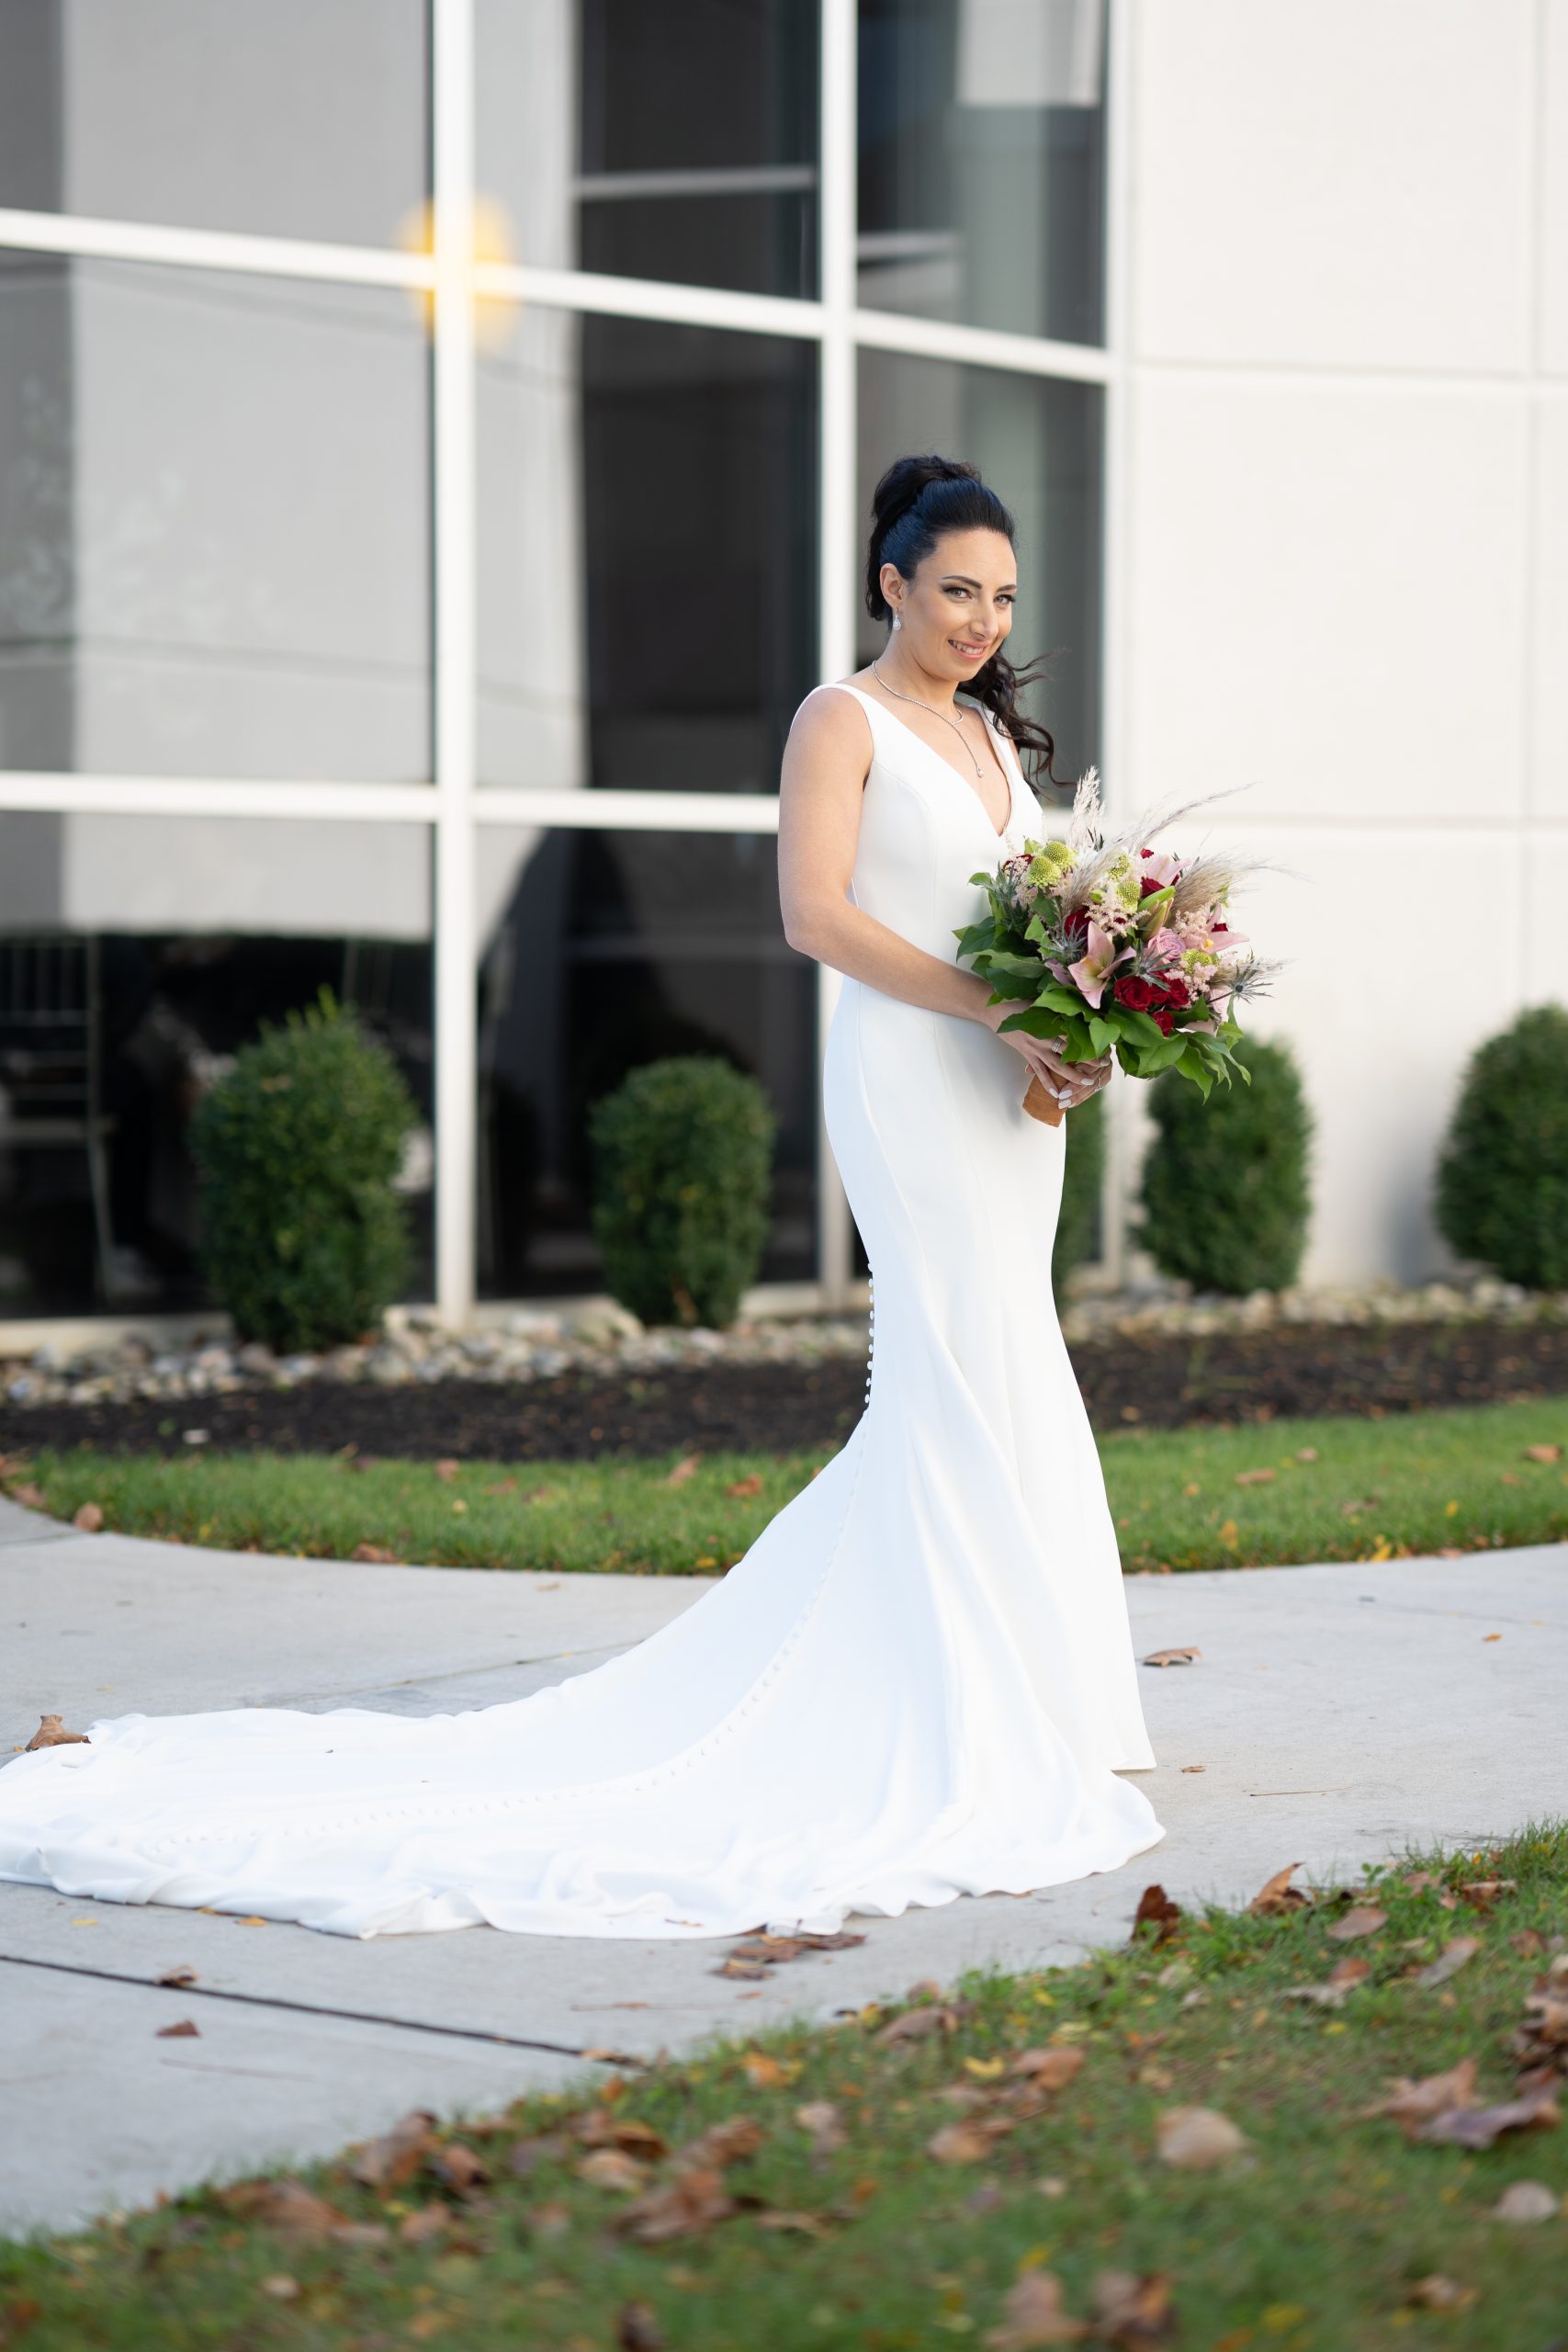 Bride In Crepe Fabric Wedding Dress Called Fernanda By Maggie Sottero